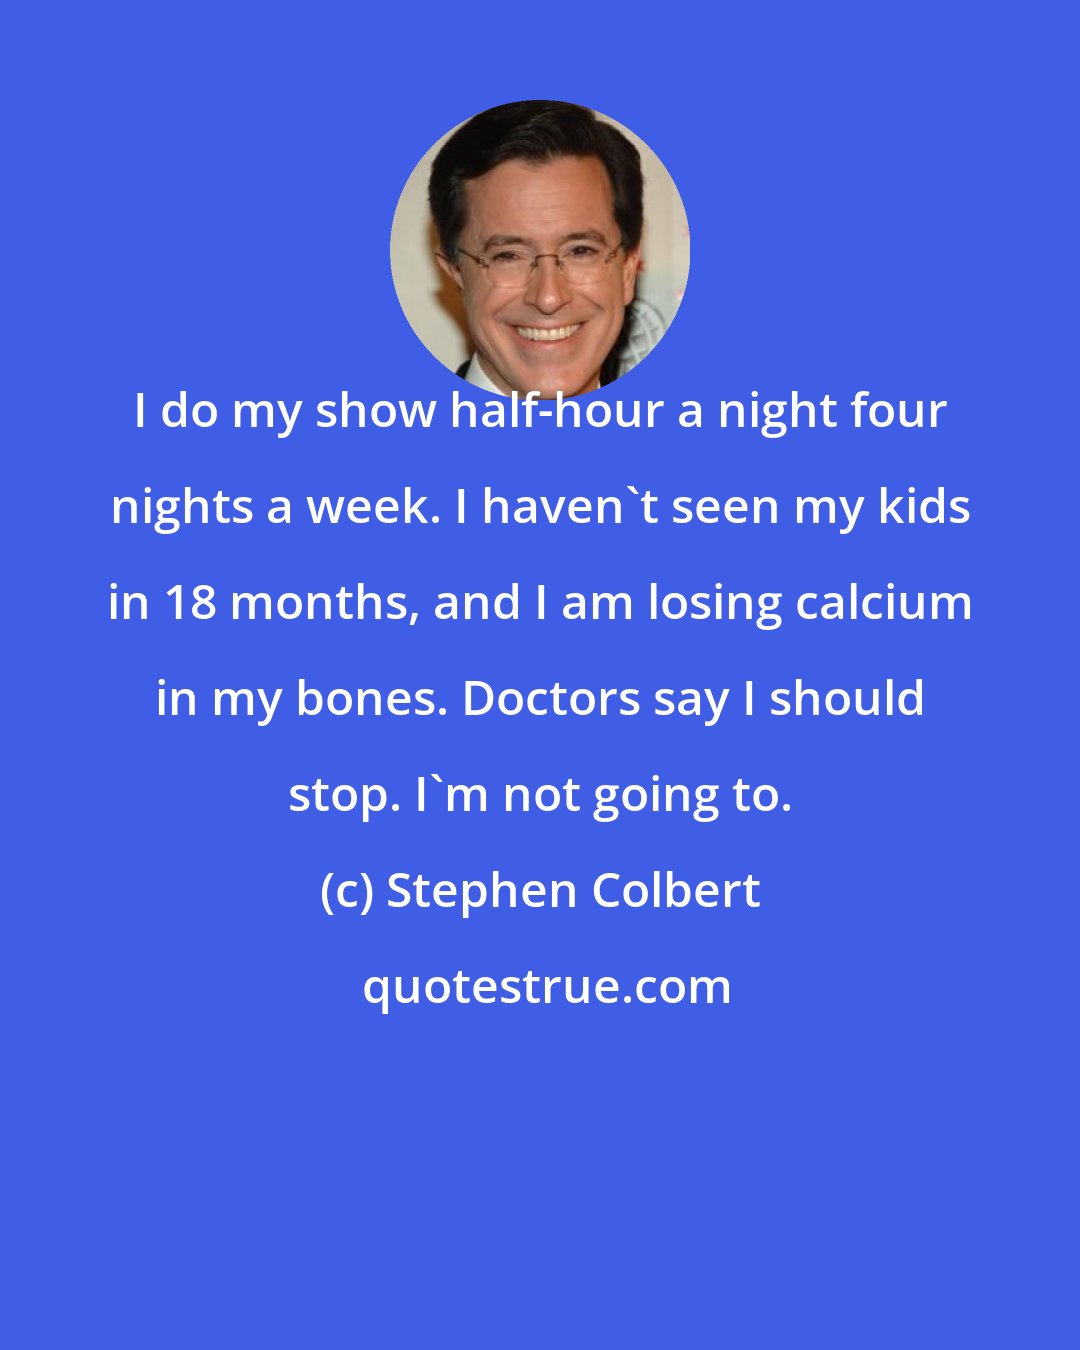 Stephen Colbert: I do my show half-hour a night four nights a week. I haven't seen my kids in 18 months, and I am losing calcium in my bones. Doctors say I should stop. I'm not going to.